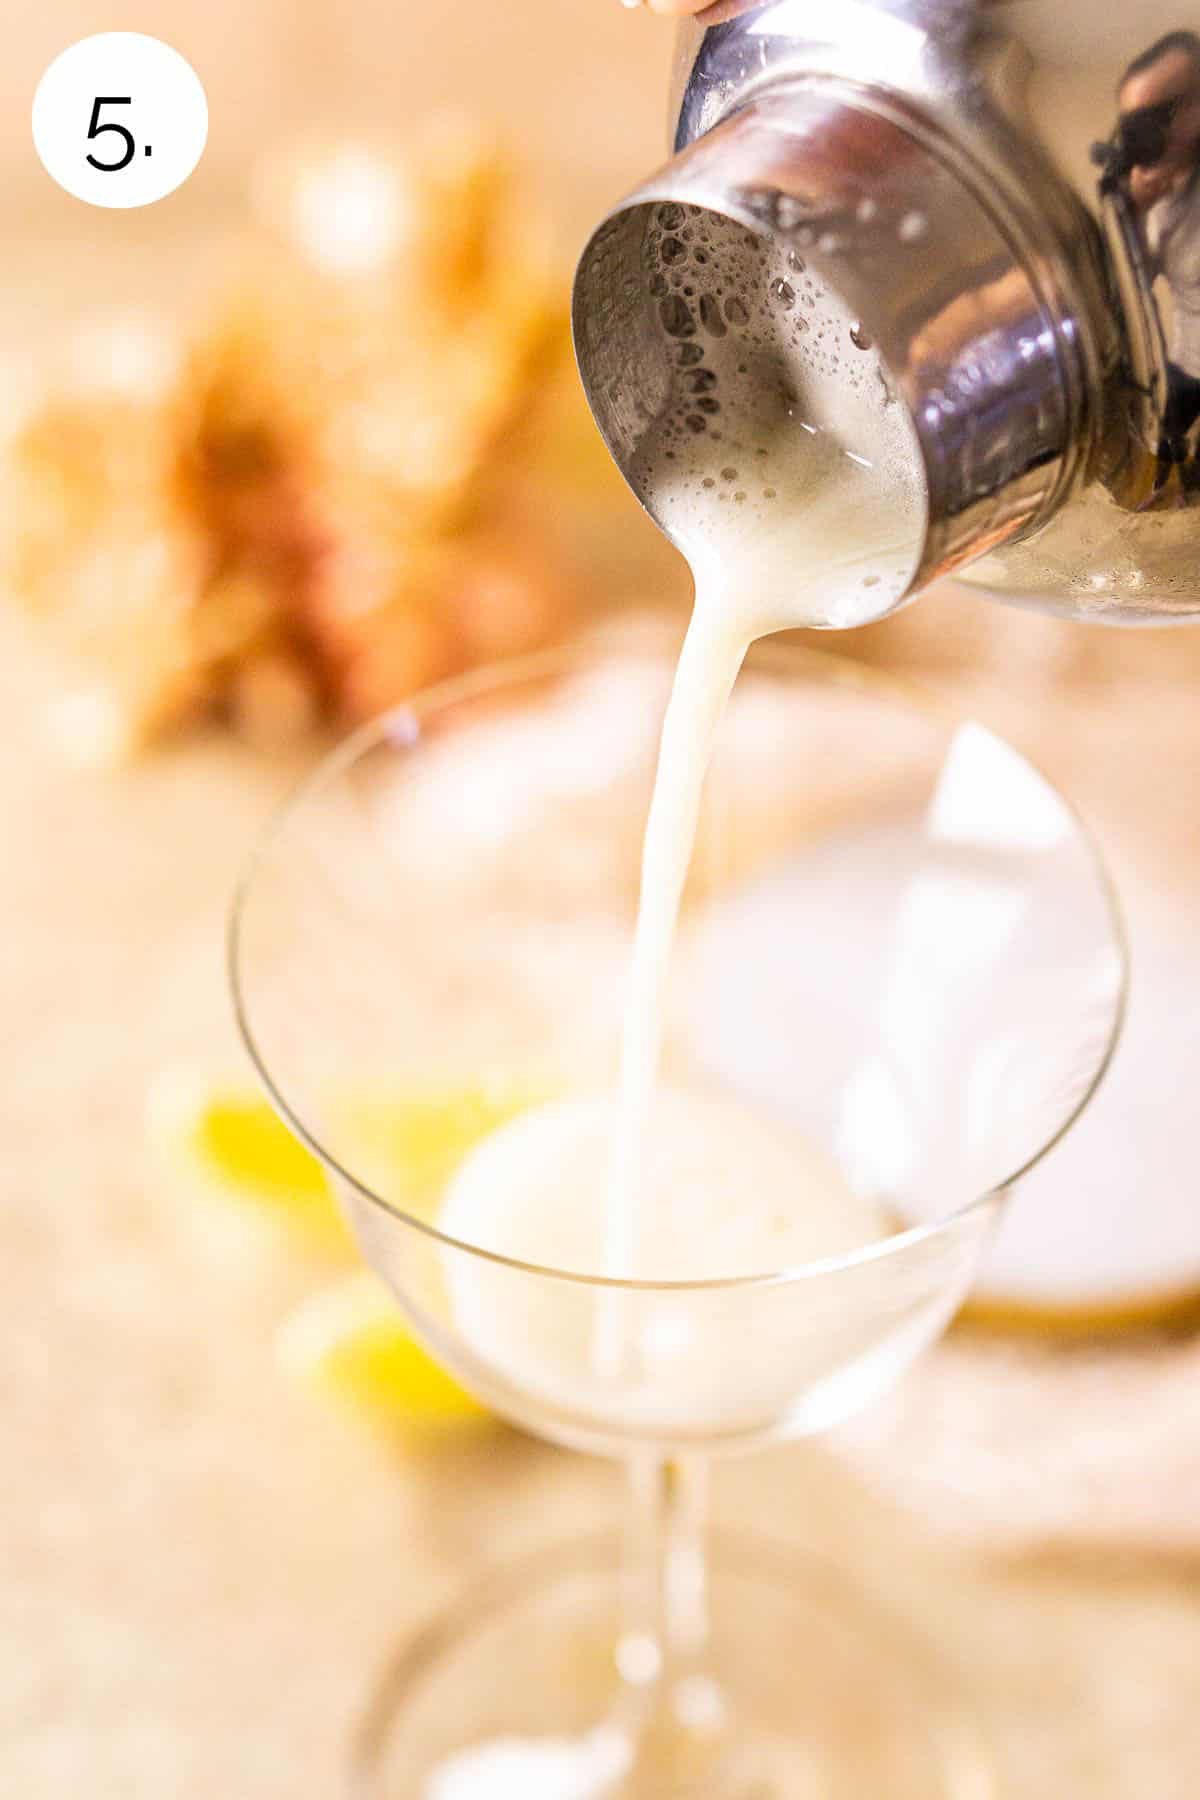 Straining the drink from the cocktail shaker into a sour glass on a cream-colored marble surface.